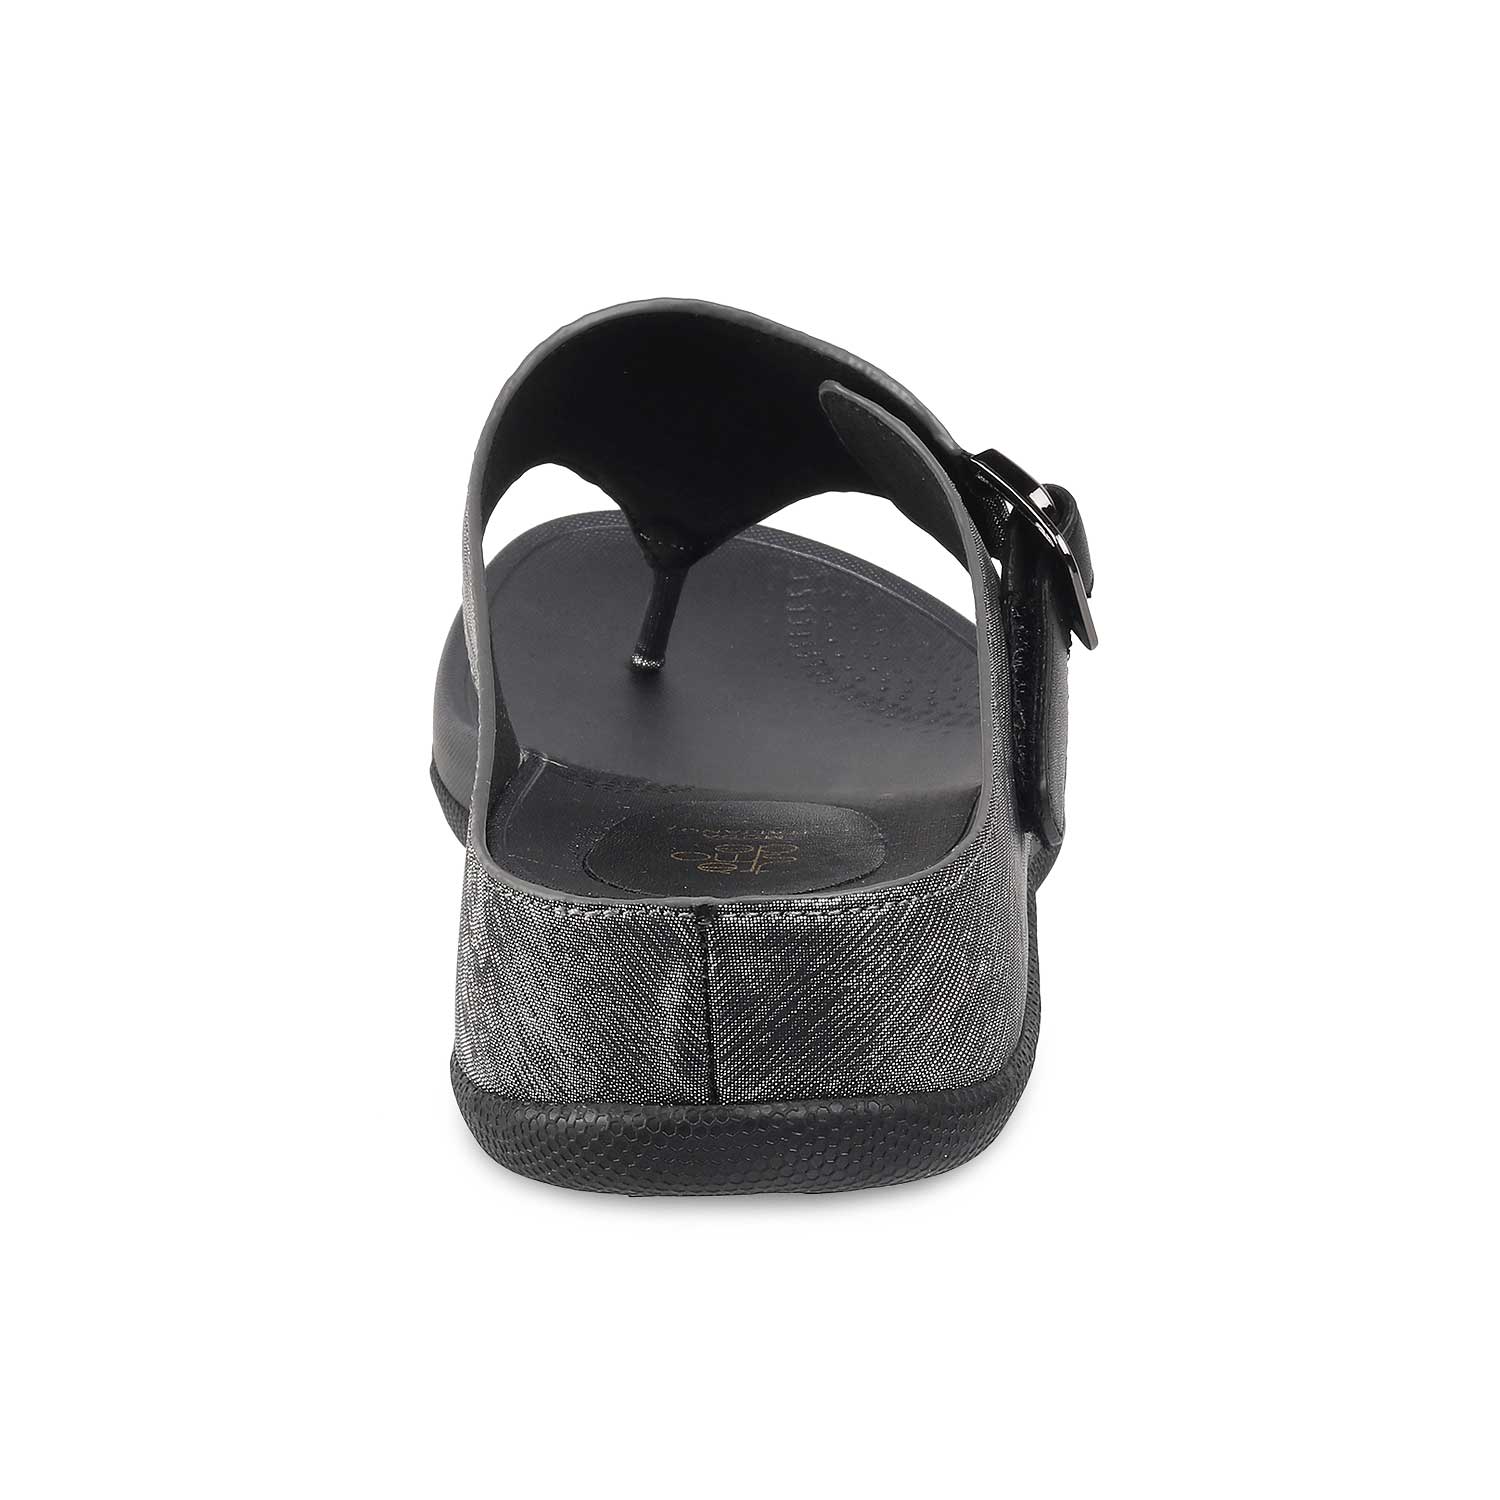 Tresmode-The Belly Black Women's Casual Flats Tresmode-Tresmode